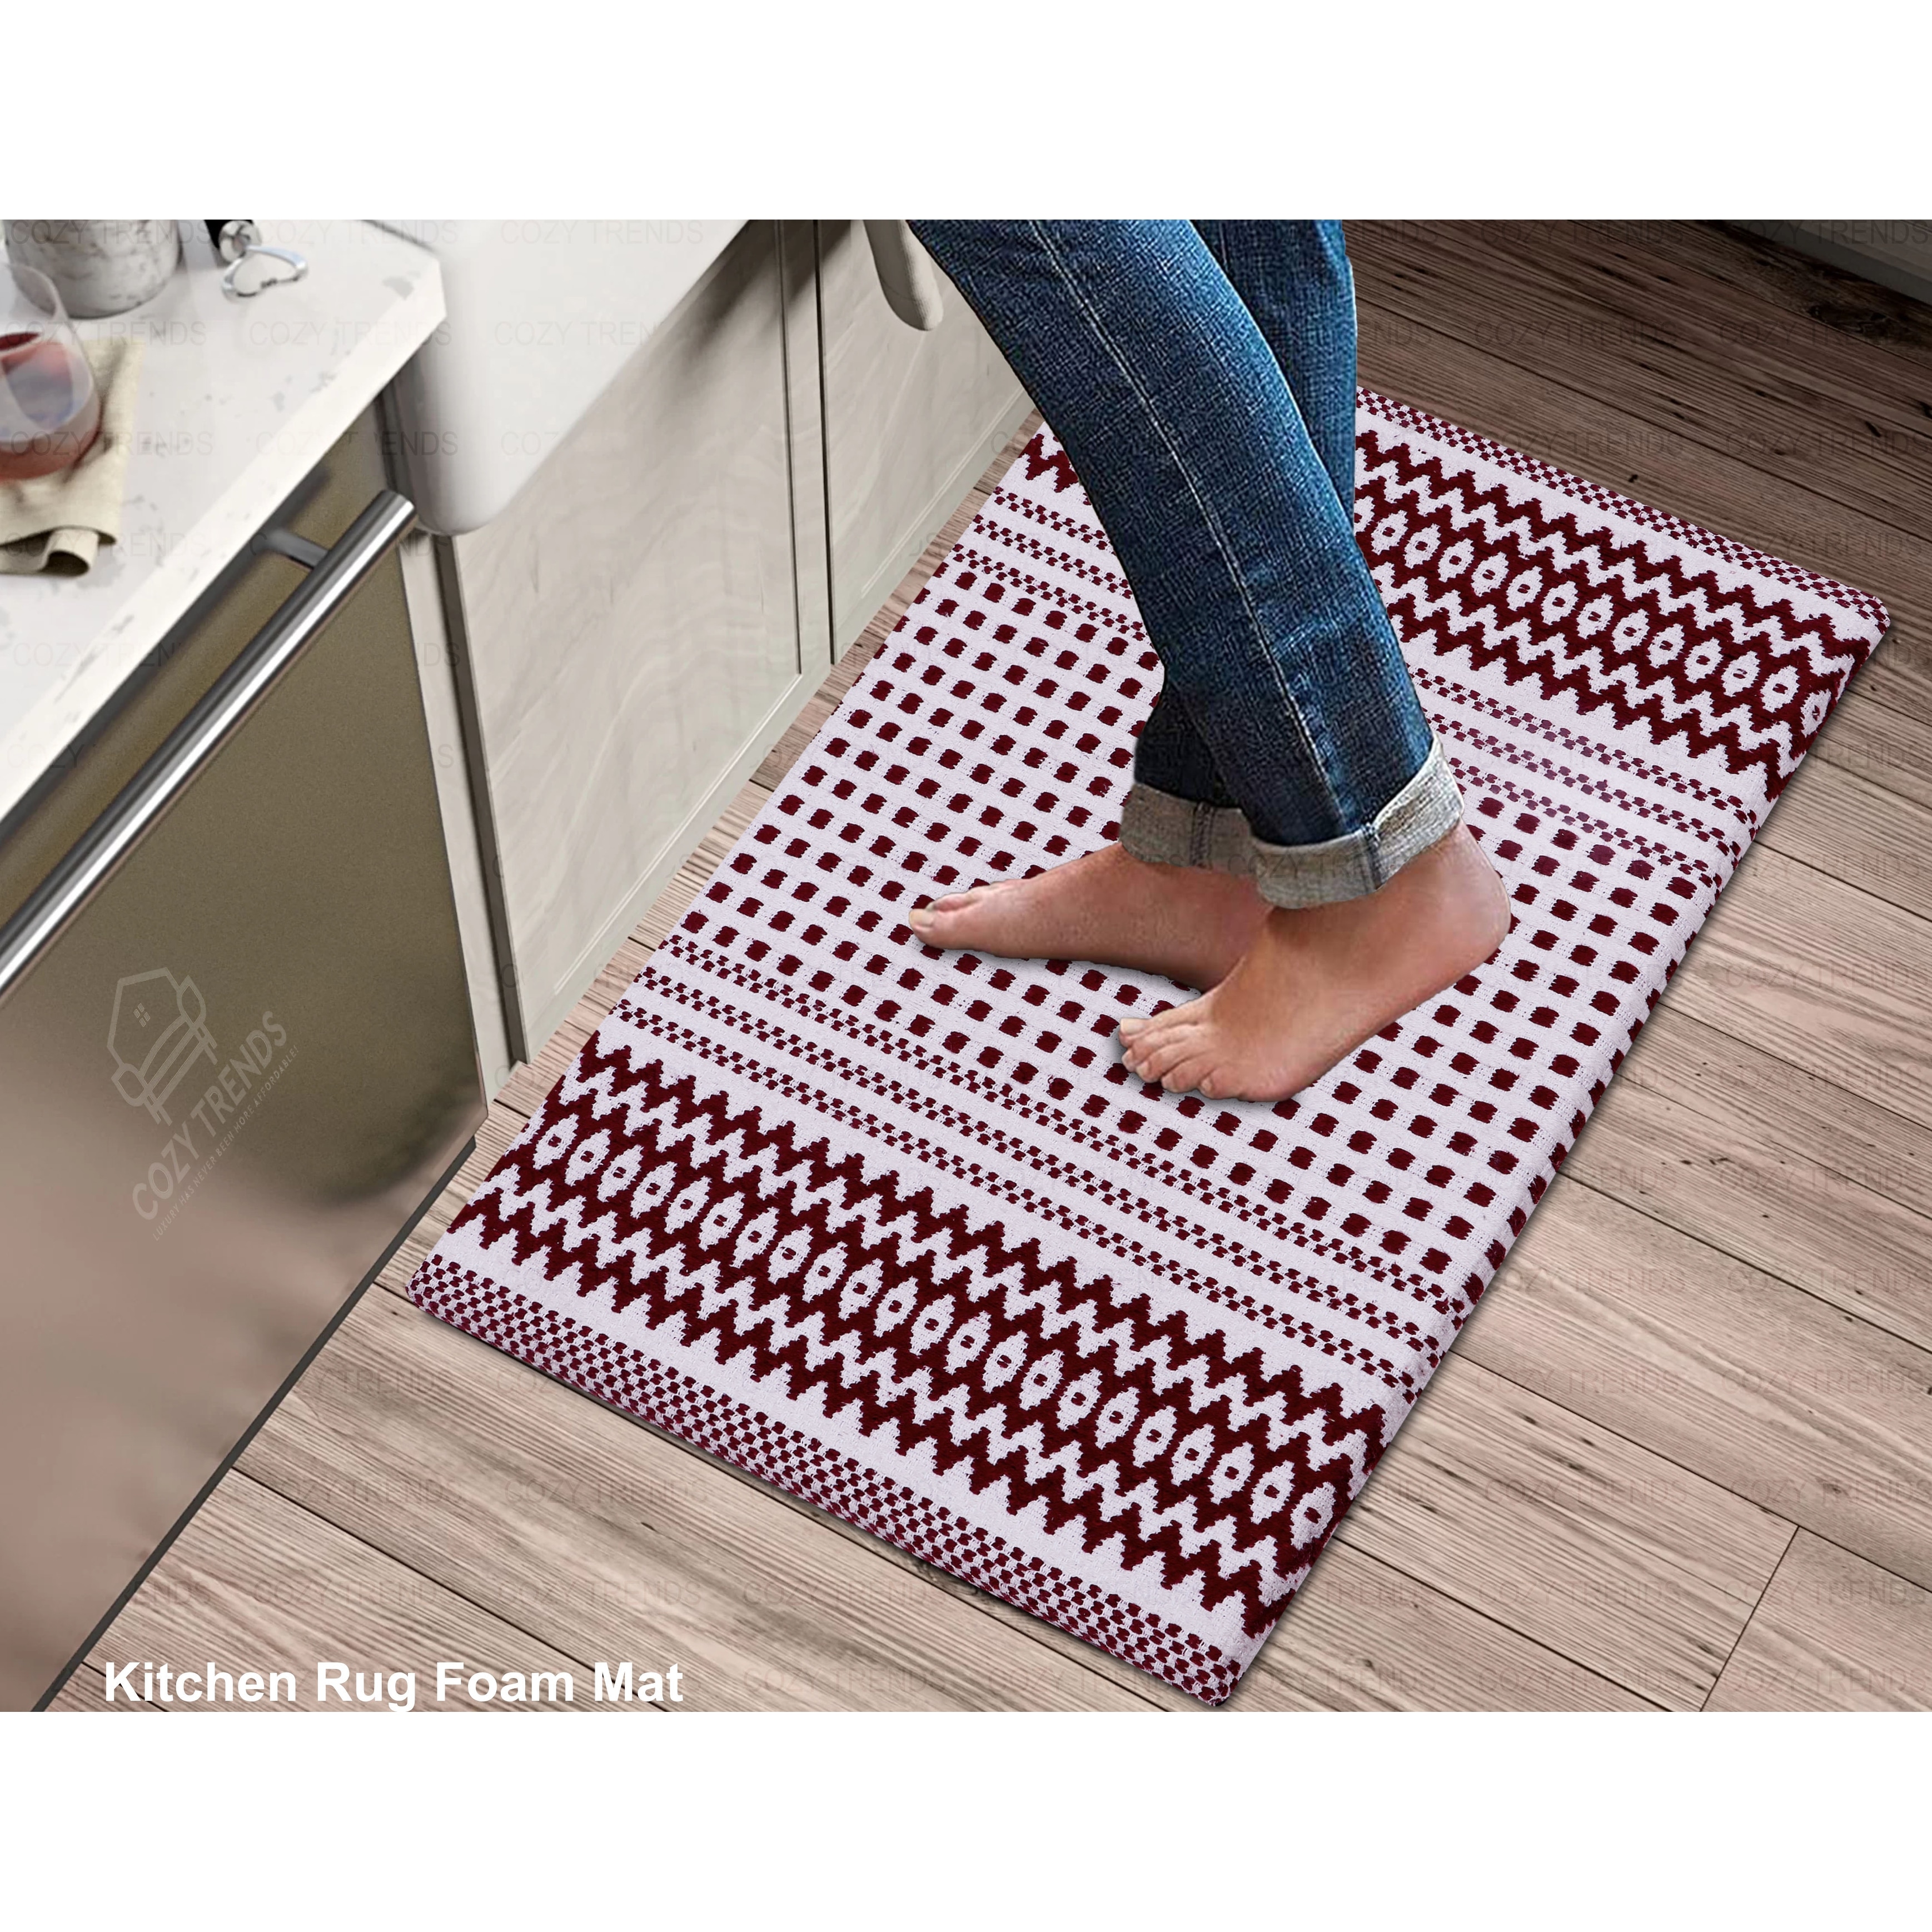 https://ak1.ostkcdn.com/images/products/is/images/direct/f2bd9e0ccbc67b93df87482c85f5377d21e4c2db/Kitchen-Mat-Cushioned-Anti-Fatigue-Kitchen-Rug%2C-Non-Slip-Mats-Comfort-Foam-Rug-for-Kitchen%2C-Office%2C-Sink%2C-Laundry---18%27%27x30%27%27.jpg